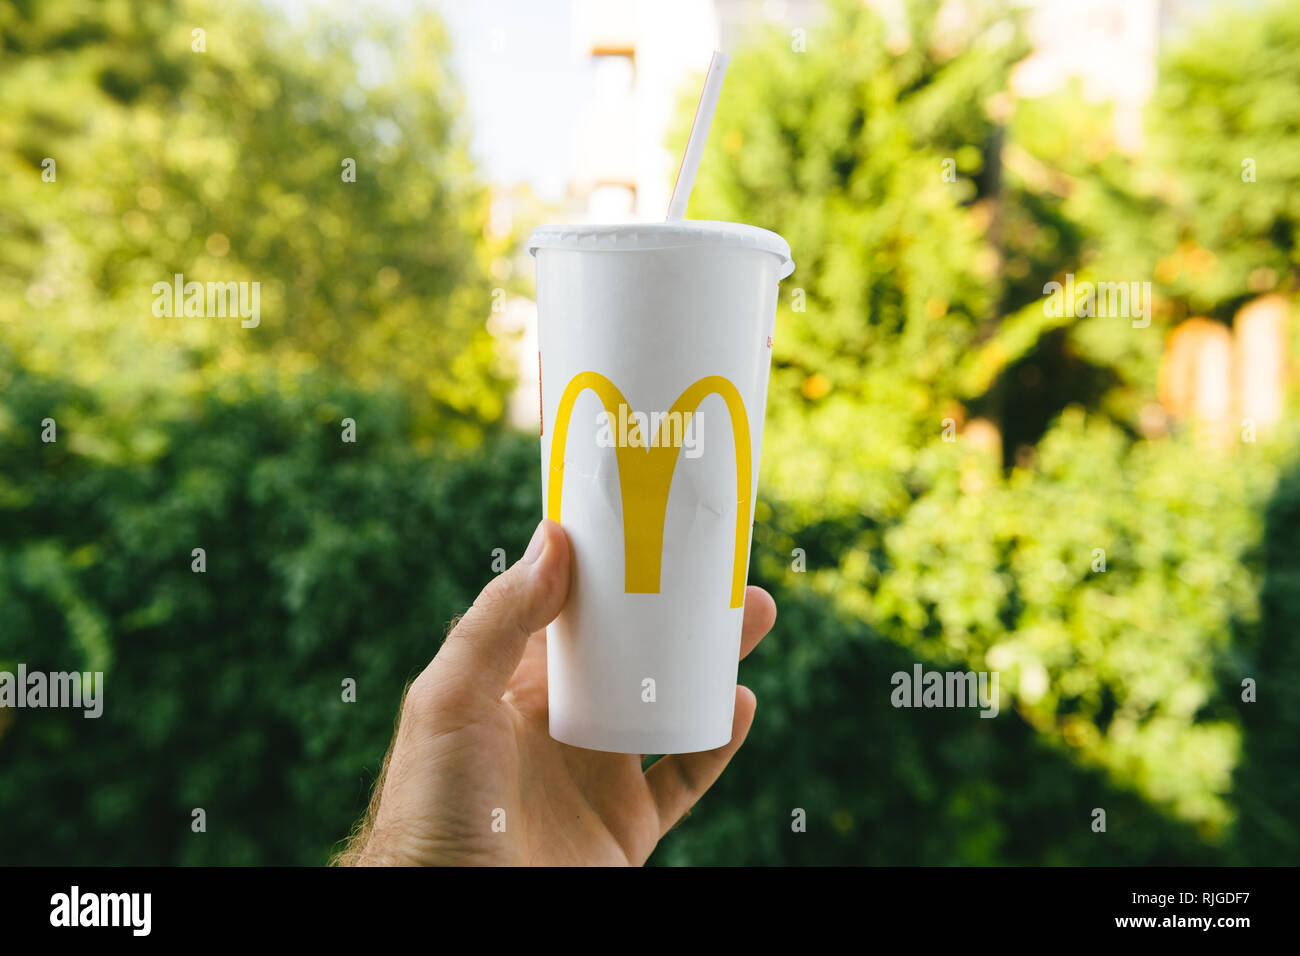 PARIS, FRANCE - JUL 27, 2018: Man holding outdoor against green background a cup of McDonald's Cola with plastic straw with yellow logo near one of the world's largest fast food restaurants Stock Photo